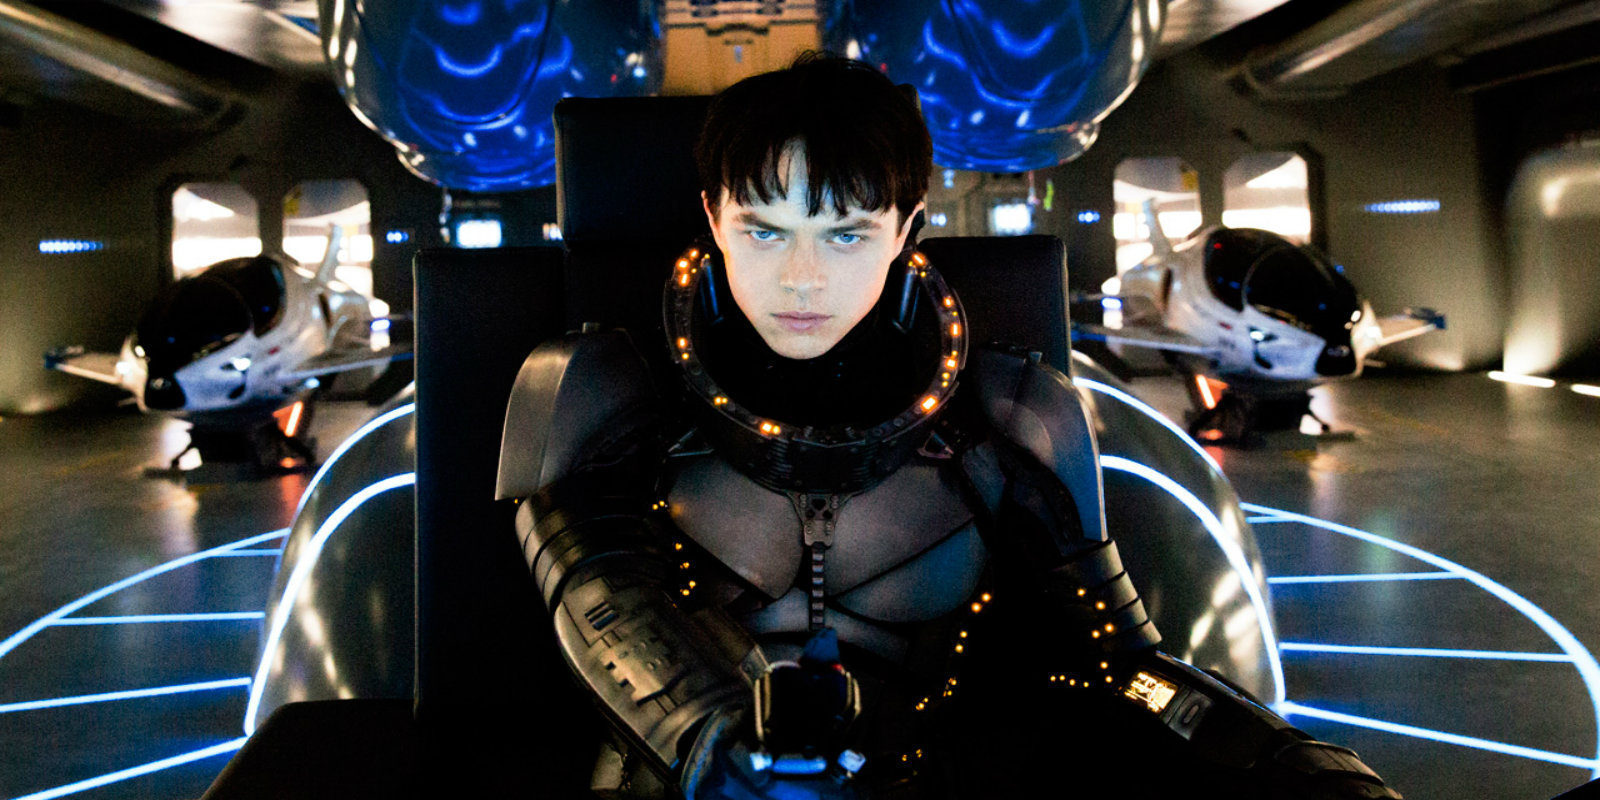 Llega el primer tráiler de 'Valerian and the City of Thousand Planets' Luc Besson